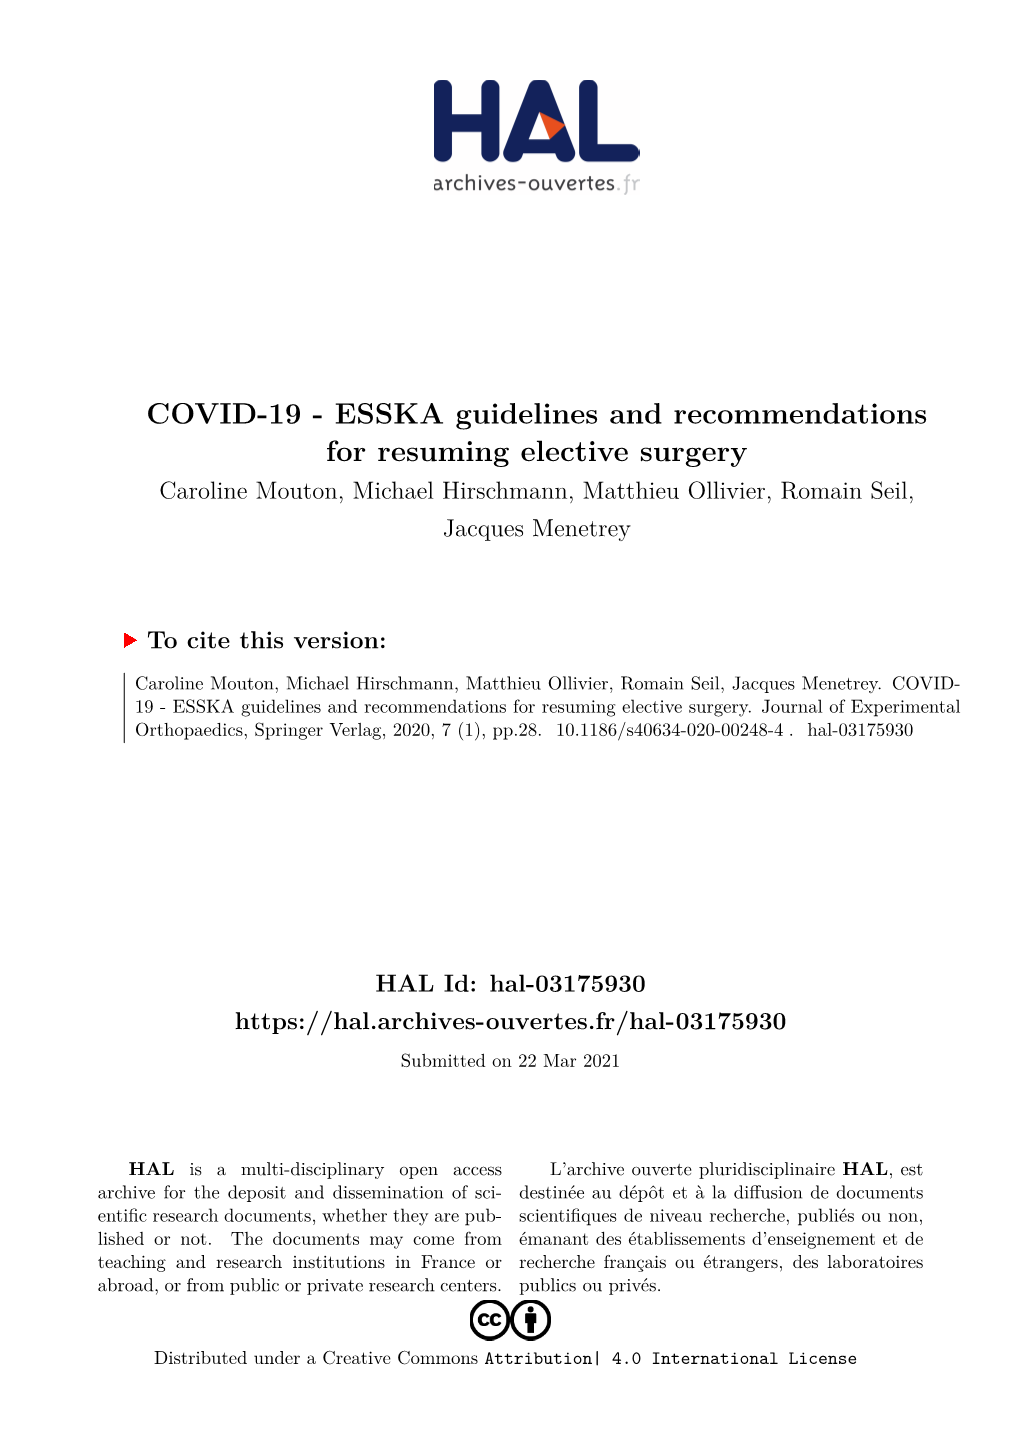 COVID-19 - ESSKA Guidelines and Recommendations for Resuming Elective Surgery Caroline Mouton, Michael Hirschmann, Matthieu Ollivier, Romain Seil, Jacques Menetrey